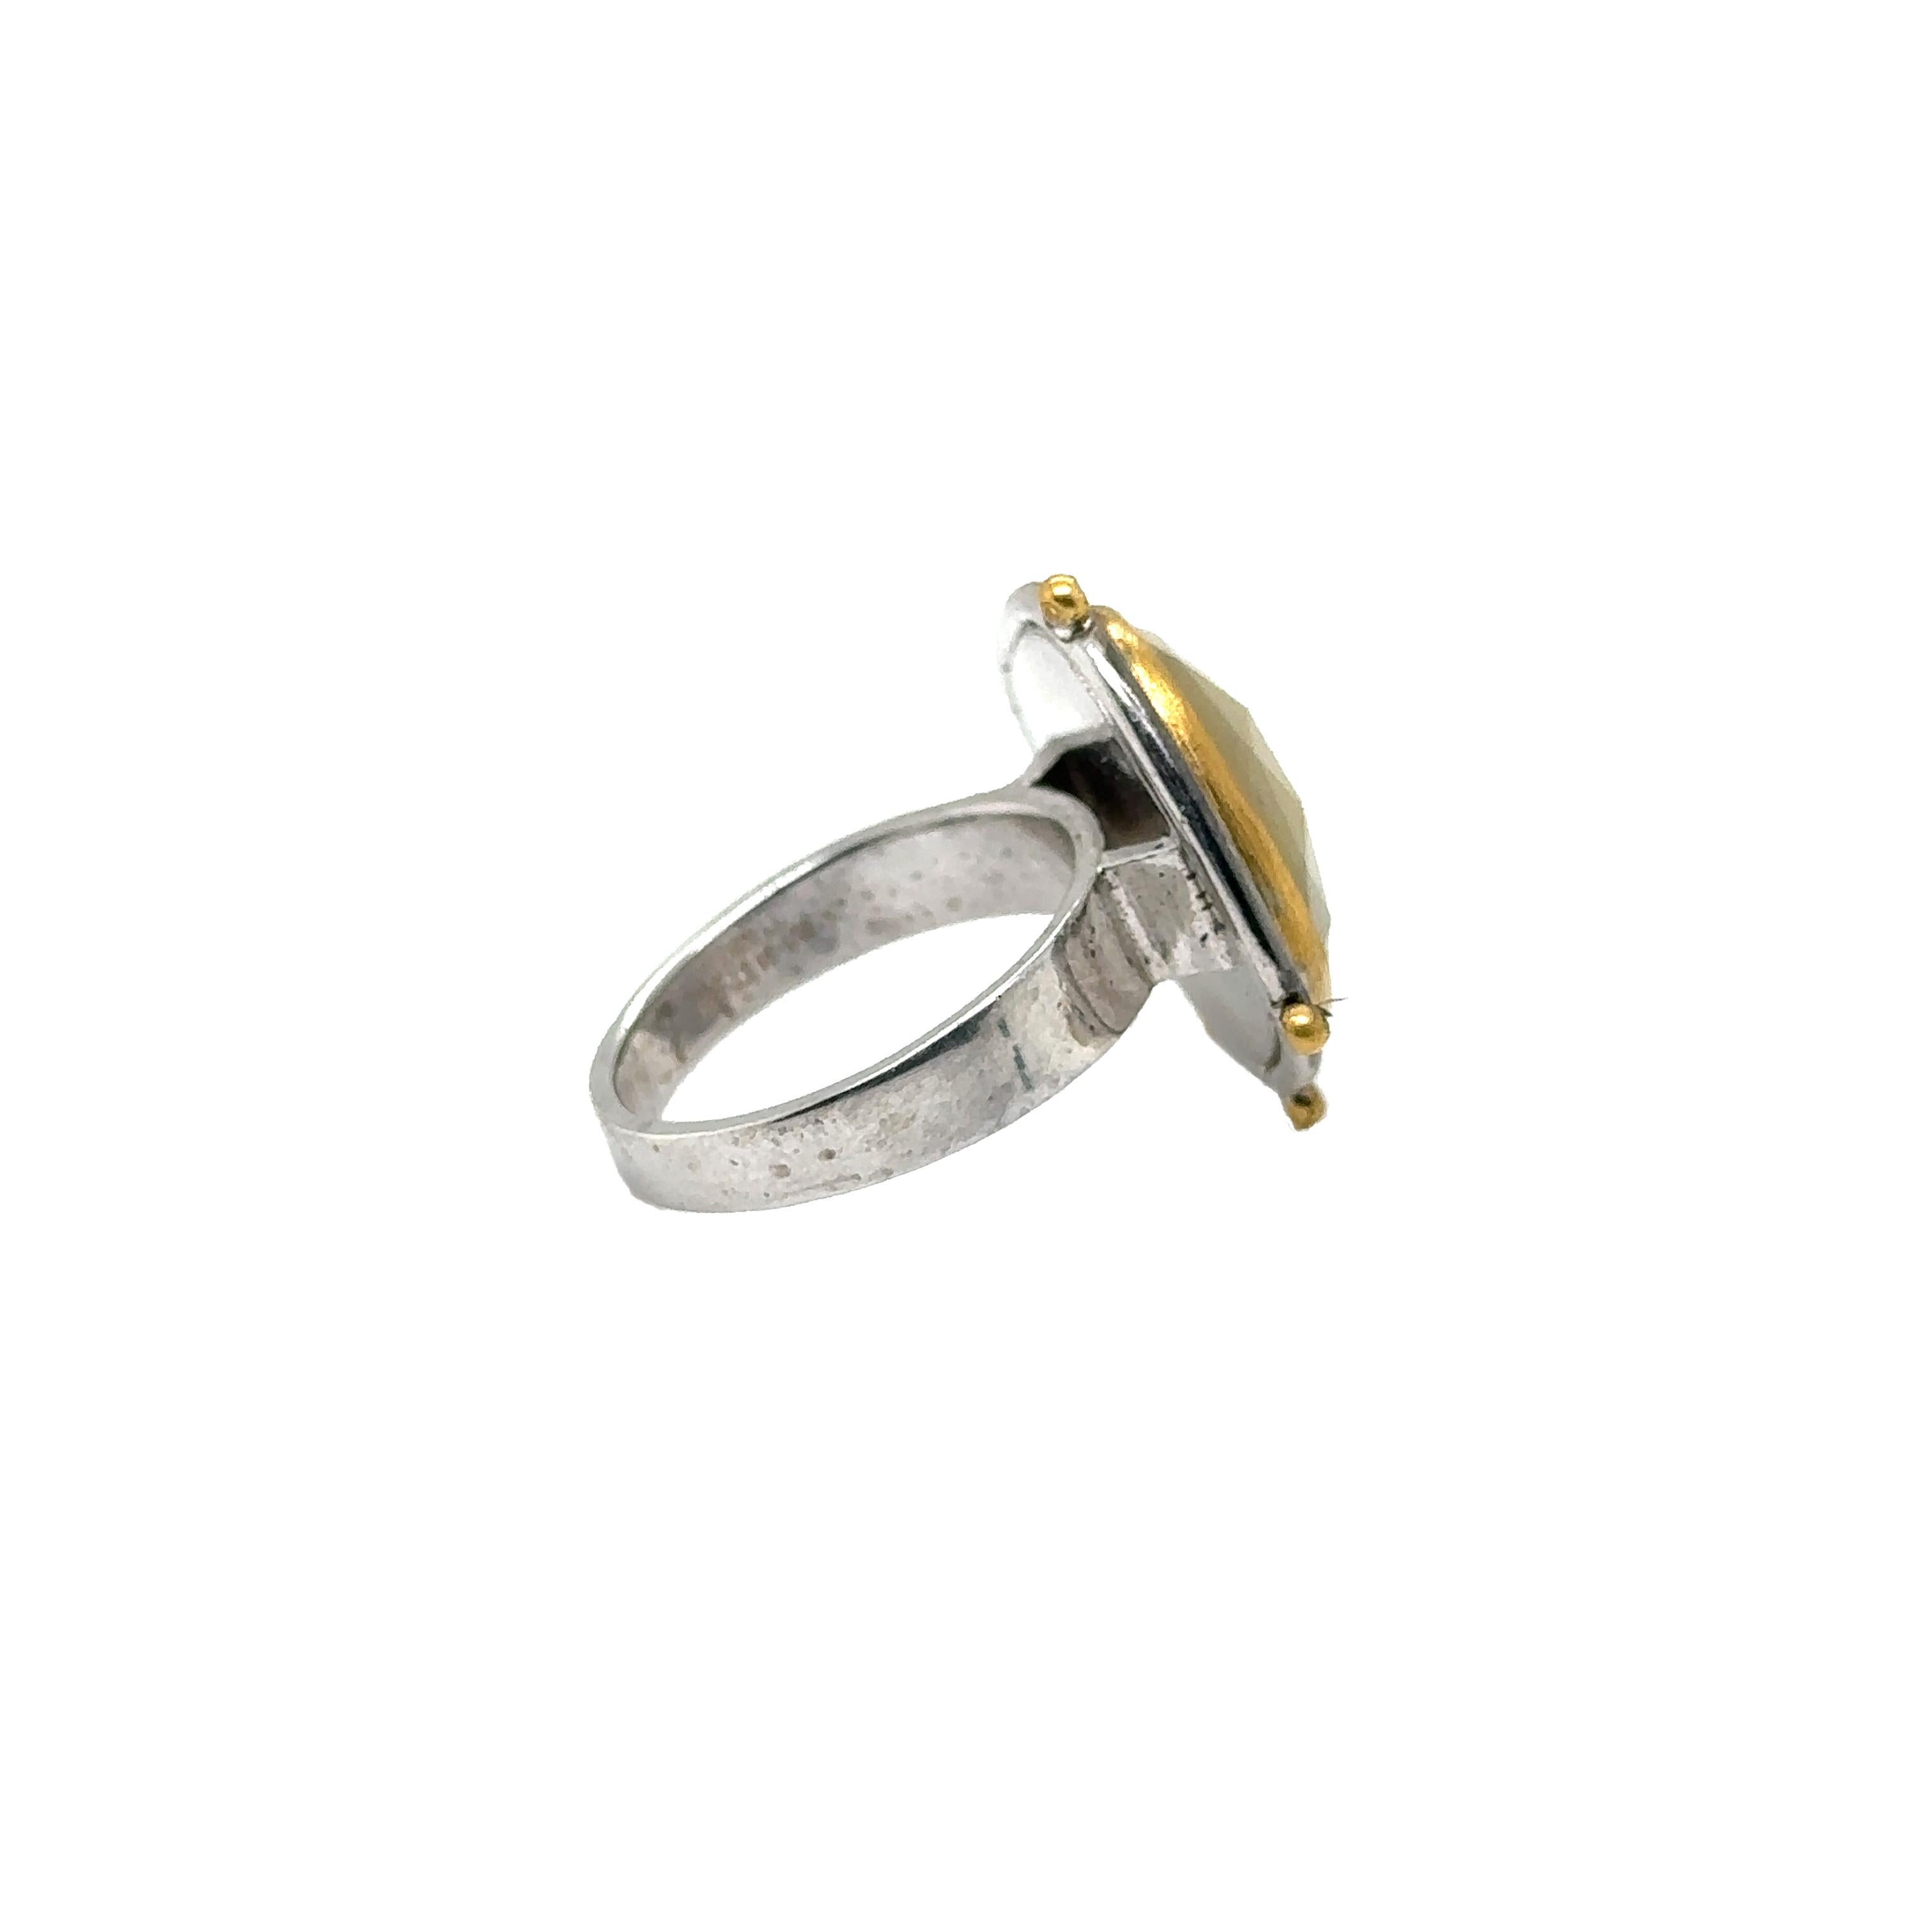 Women's JAS-19-1835 - 24K/SS HANDMADE RING w CHROME DIOPSIDES & NATURAL YELLOW SAPPHIRE For Sale